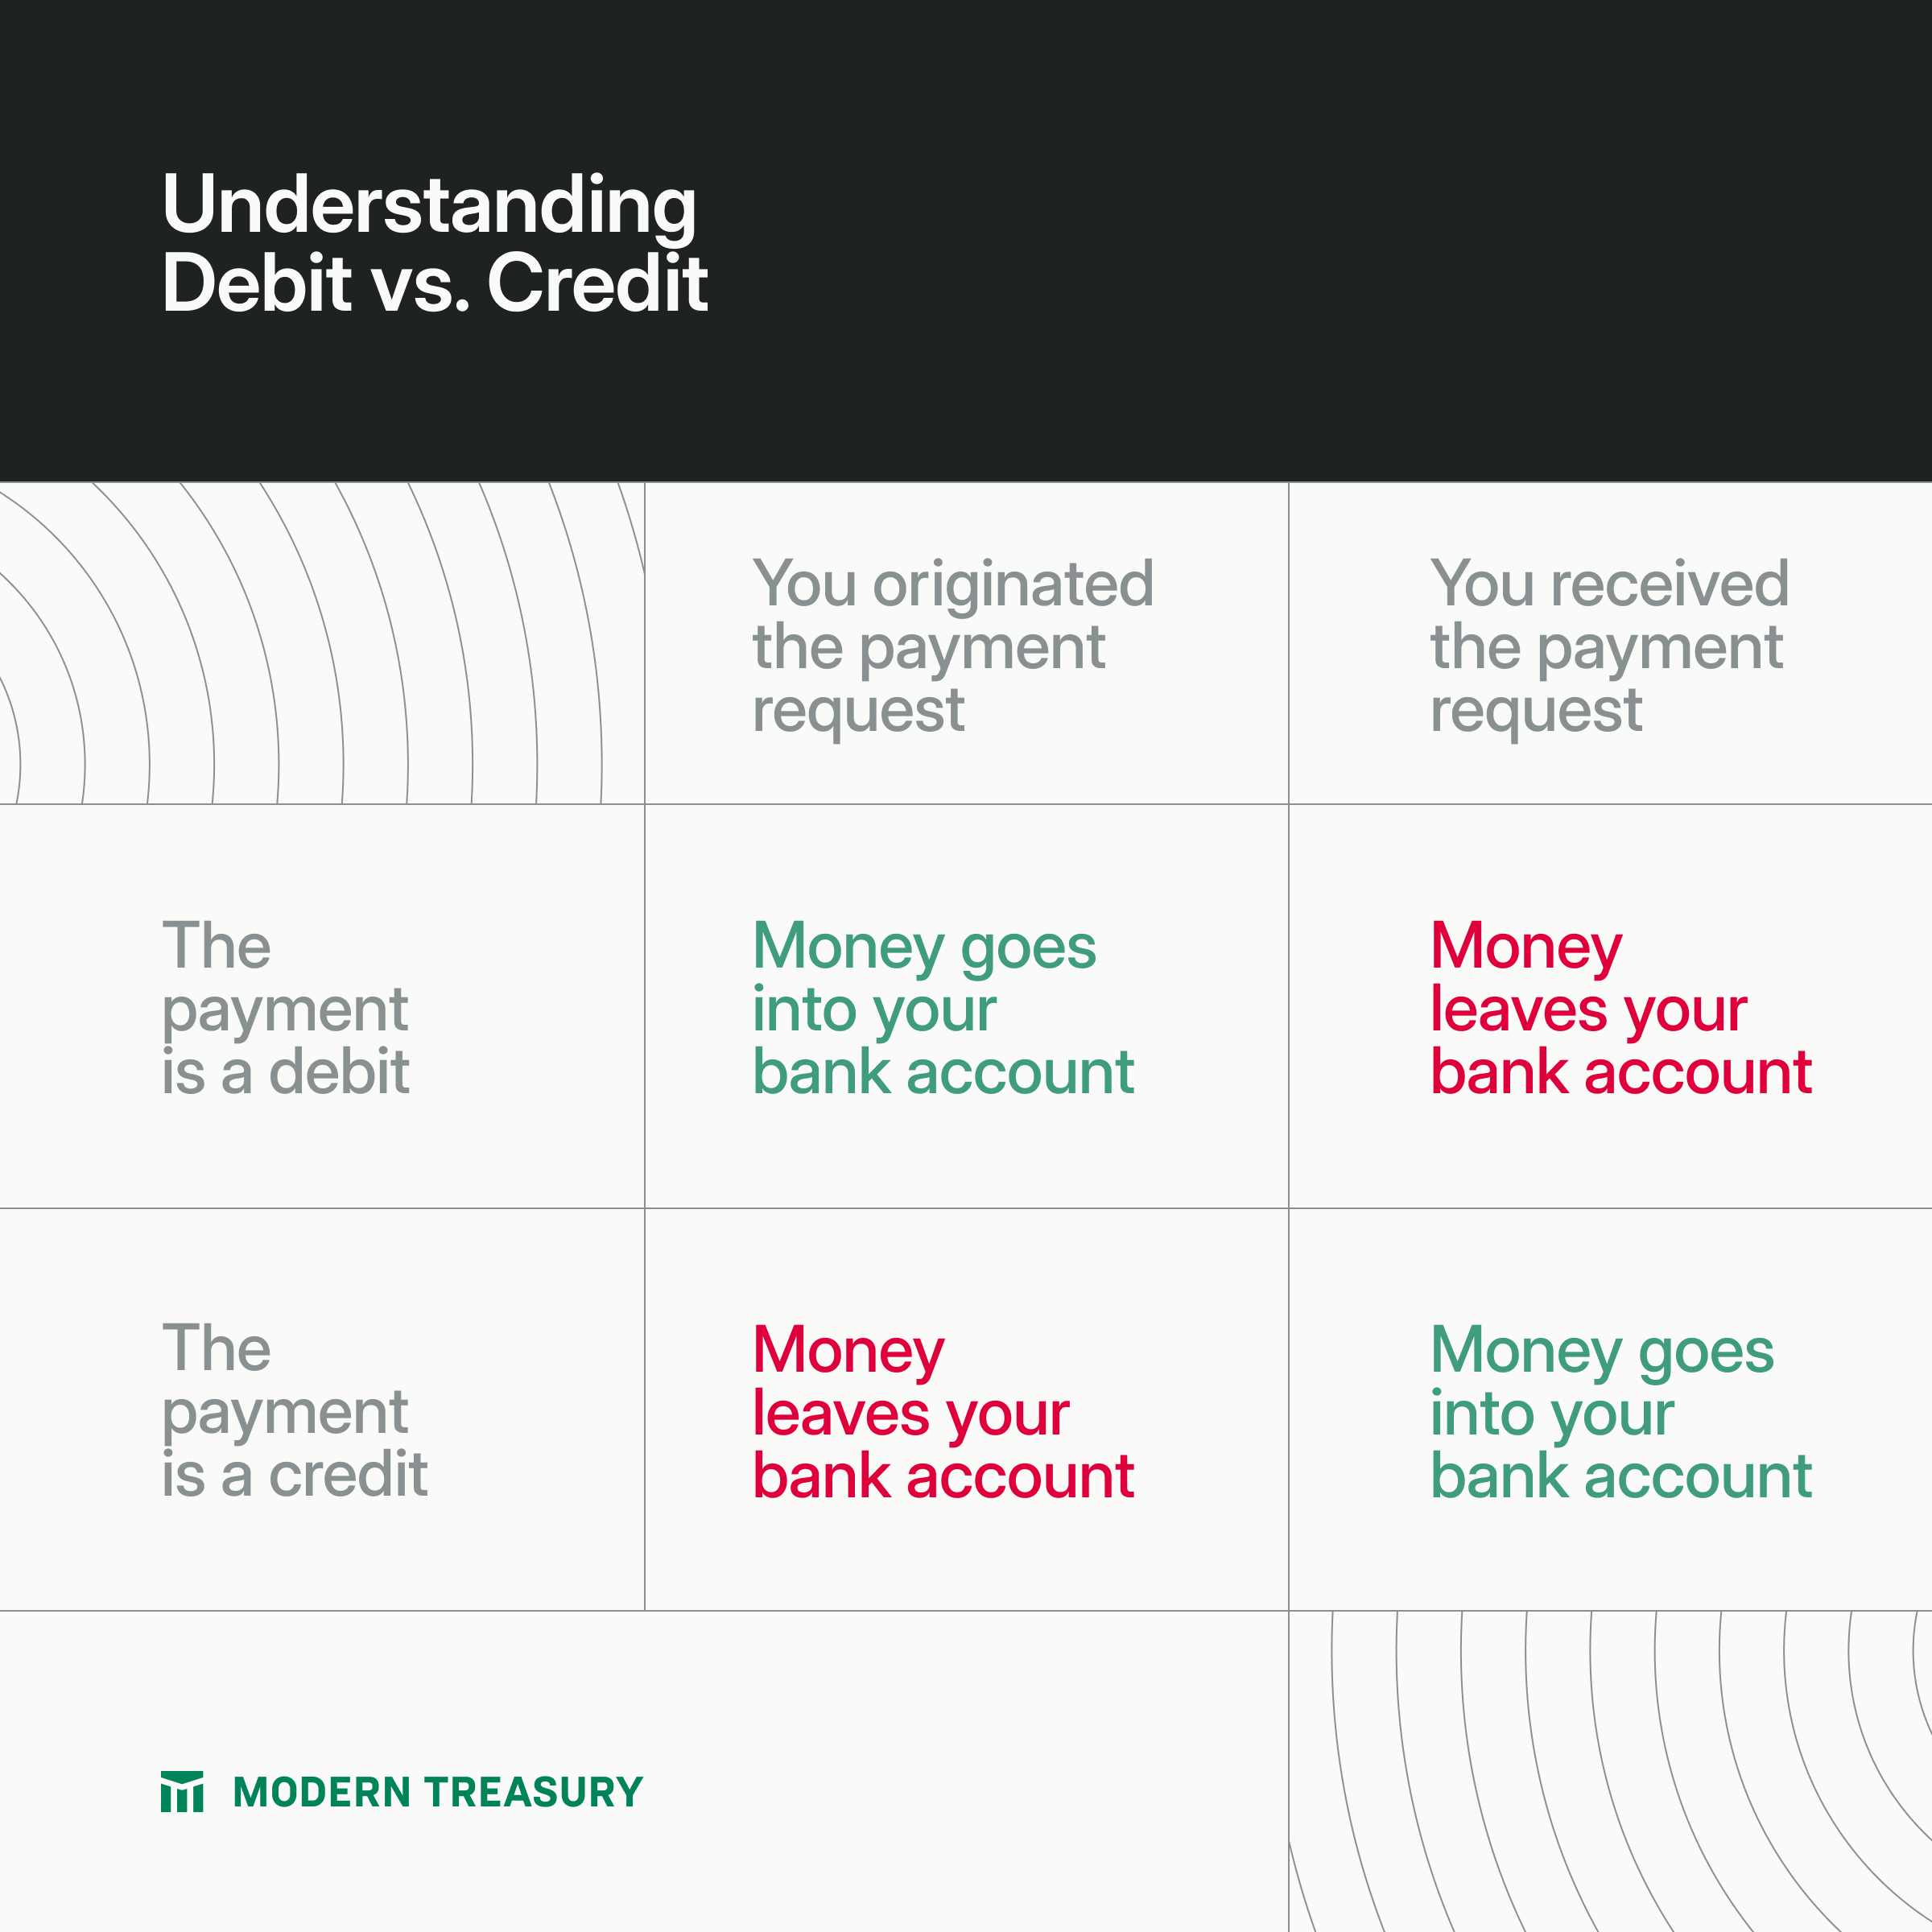 A table showing credit vs. debit depending on which party originated/received the payment